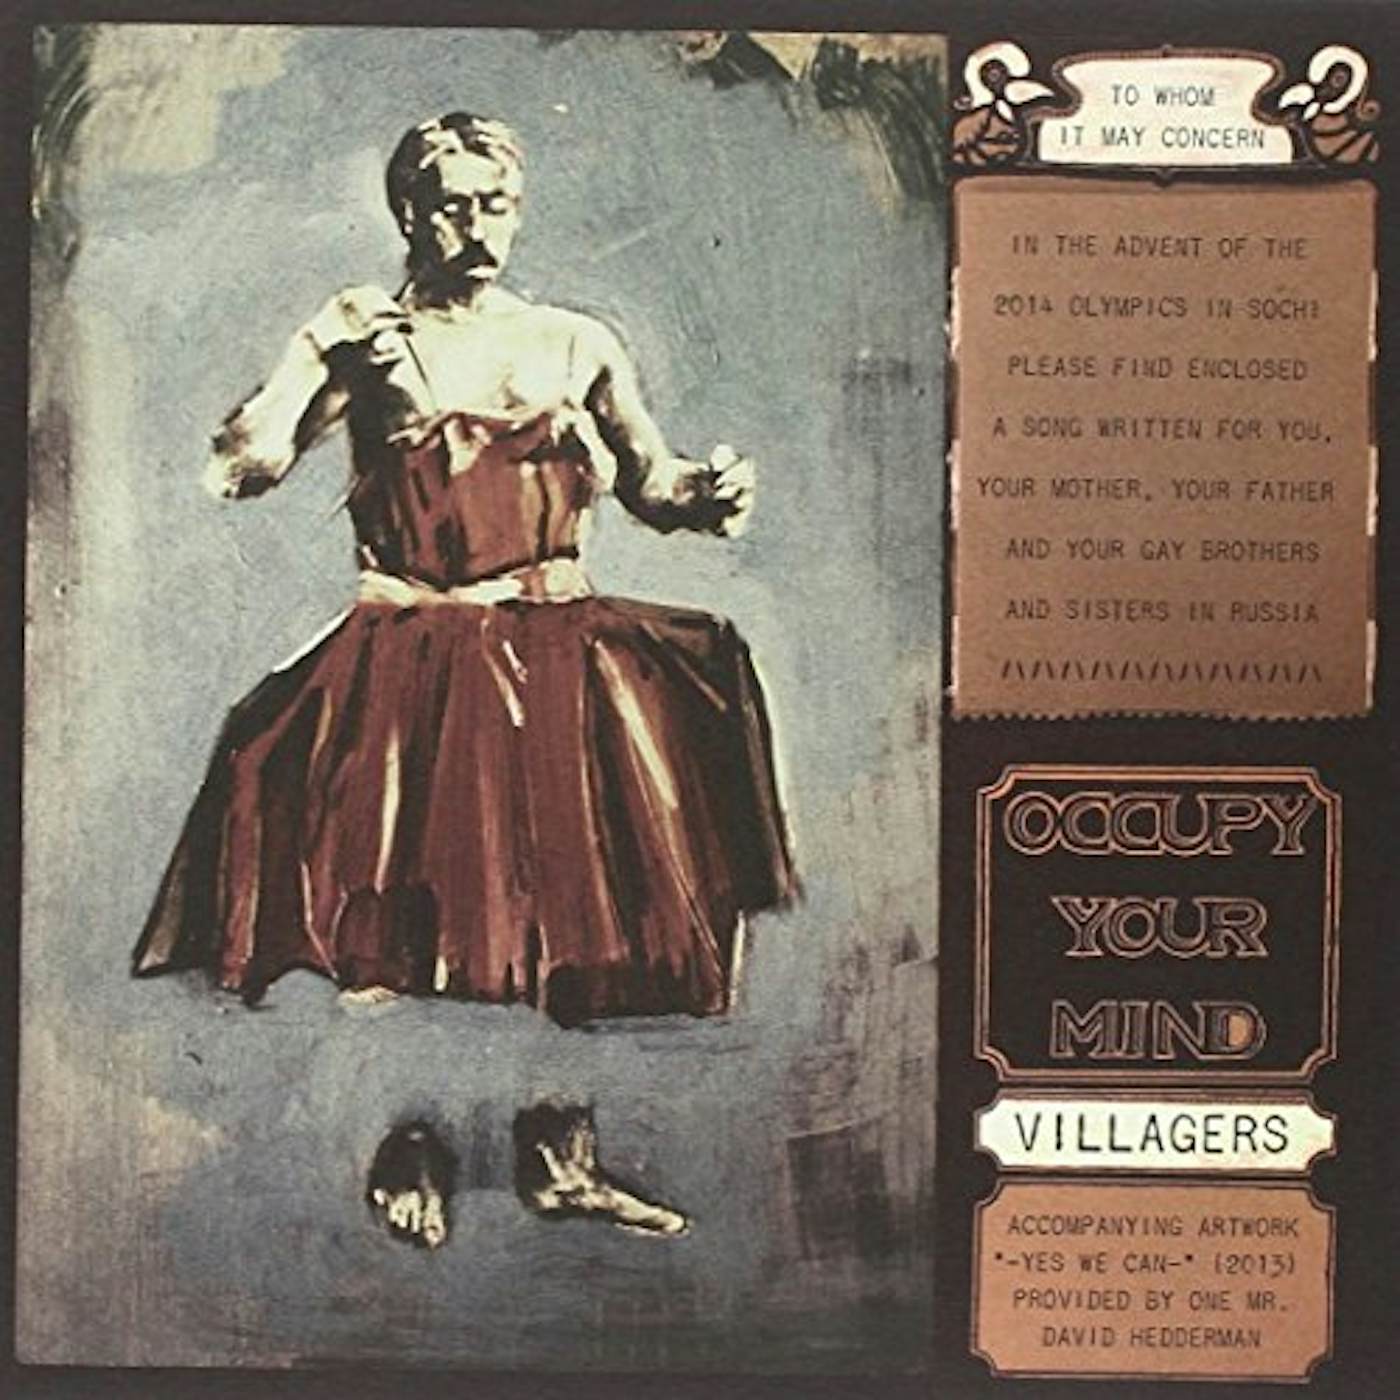 Villagers Occupy Your Mind Vinyl Record